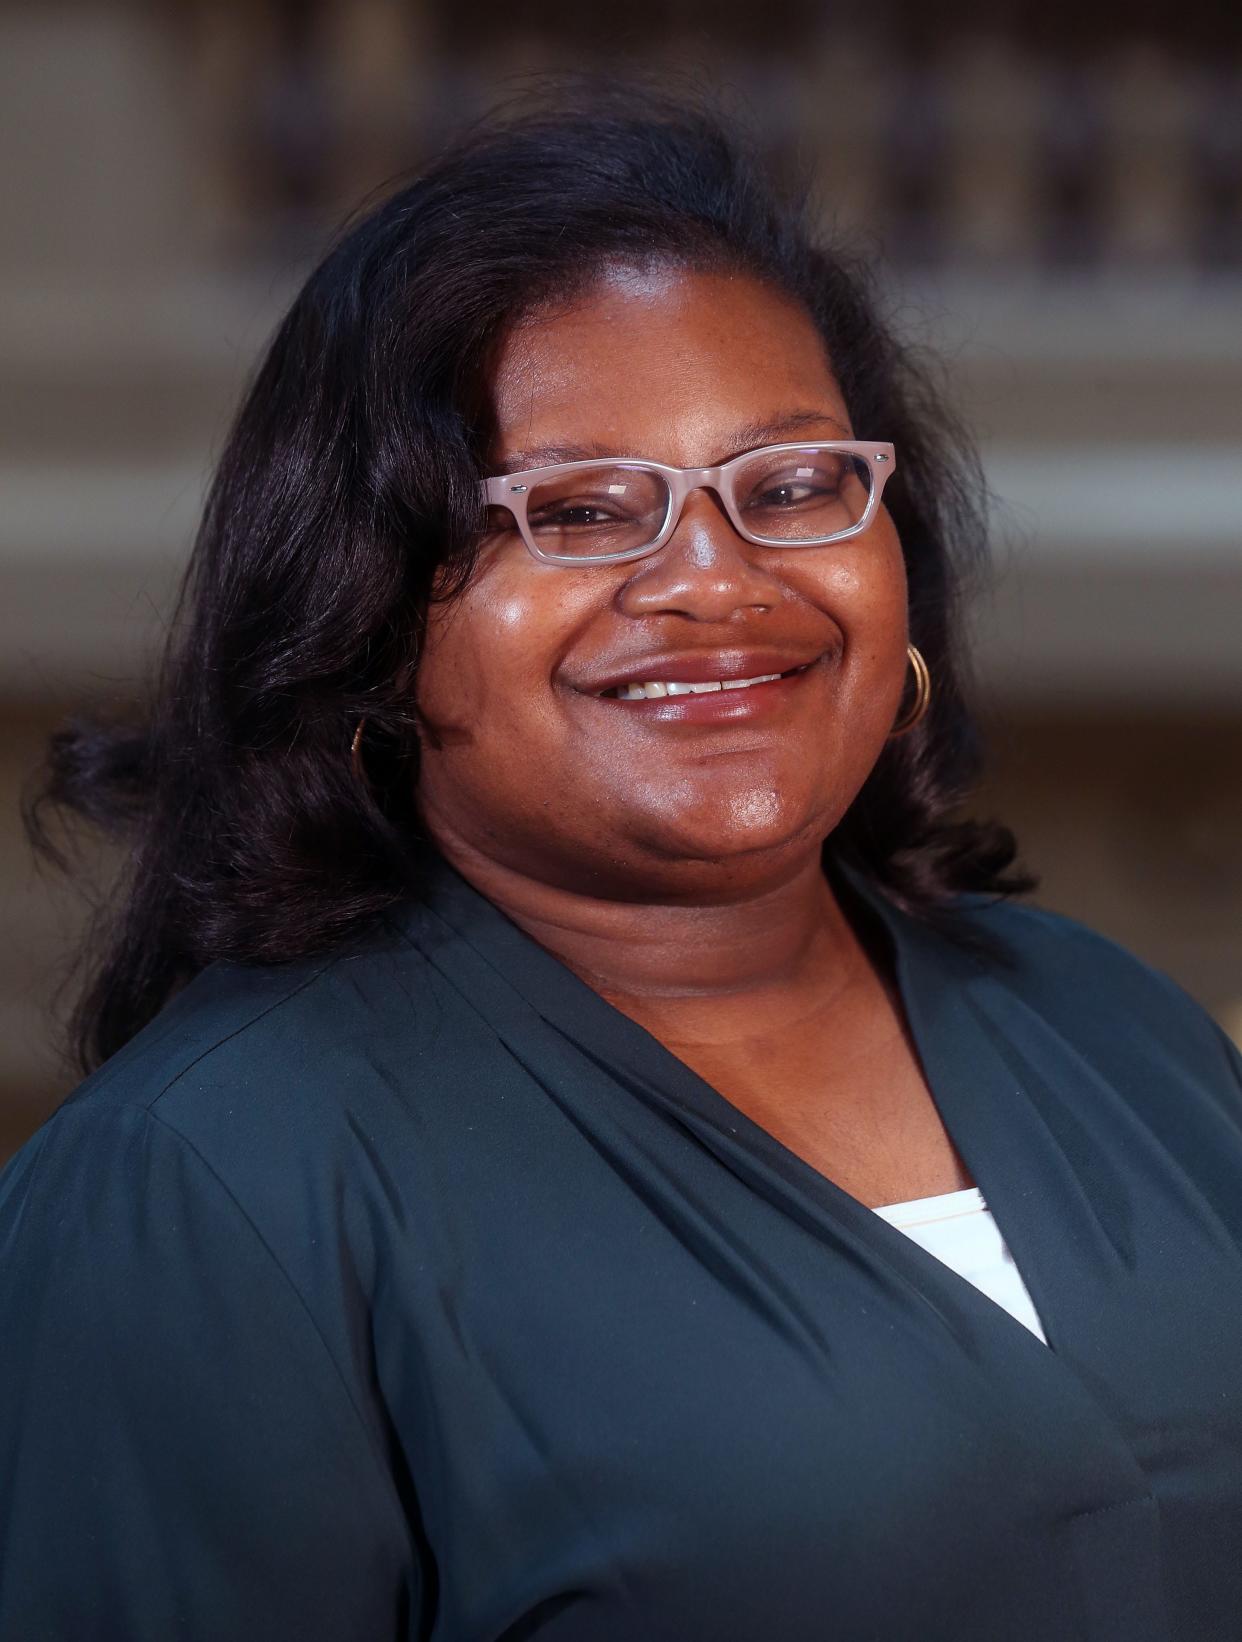 Wisconsin State Representative LaKeshia Myers on Tuesday, April 13, 2021. Myers represents the 12th assembly district in the Wisconsin State Assembly.